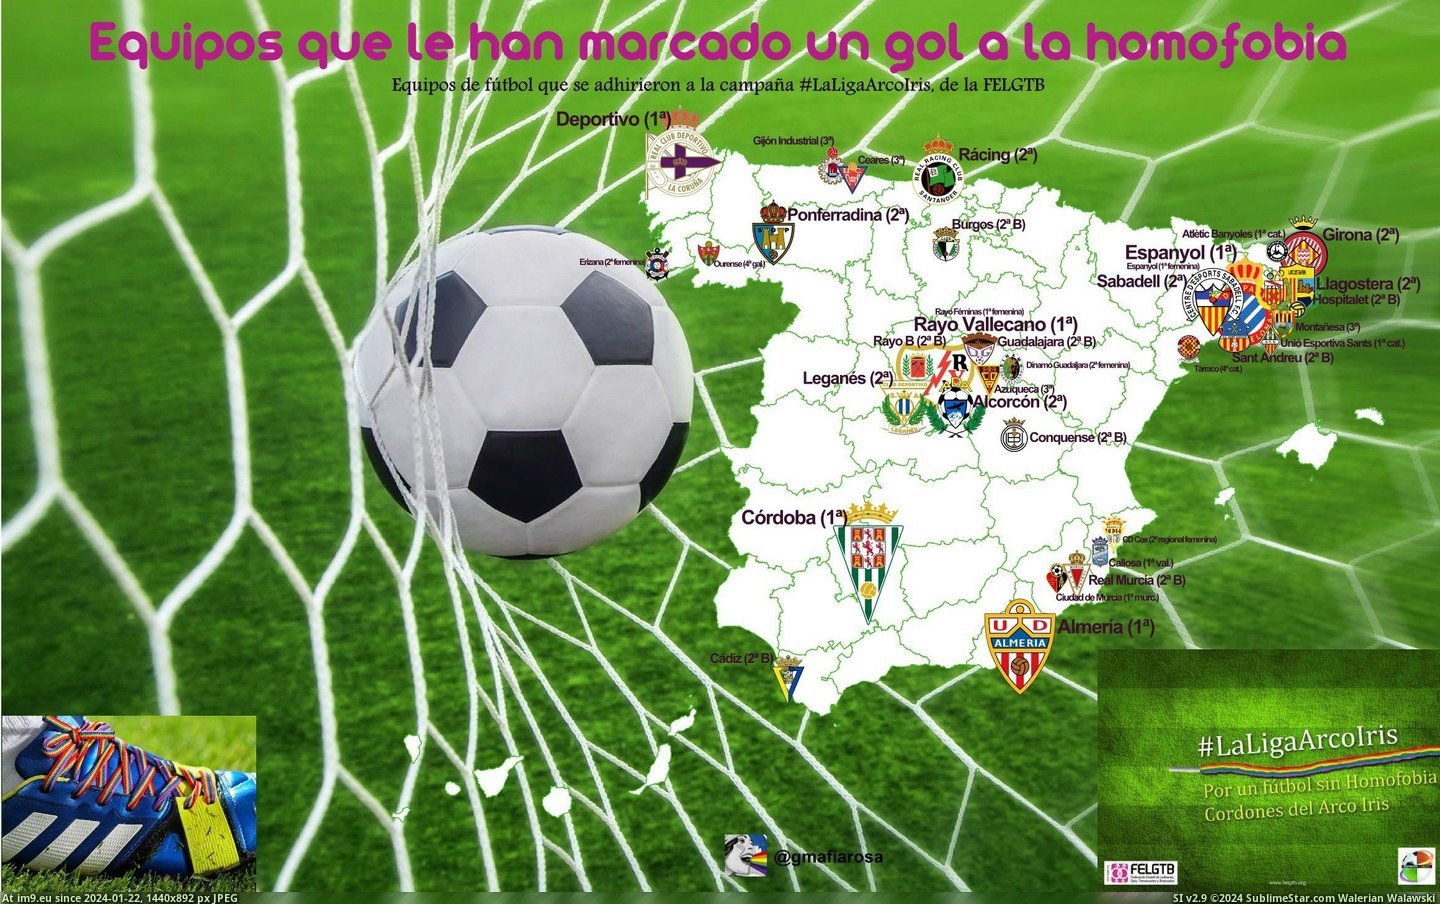 #Football #Rainbow #Joined #Teams #Spanish #Campaign [Mapporn] Spanish football teams that joined 'Rainbow laces against homophobia' campaign [2321x1449] Pic. (Изображение из альбом My r/MAPS favs))